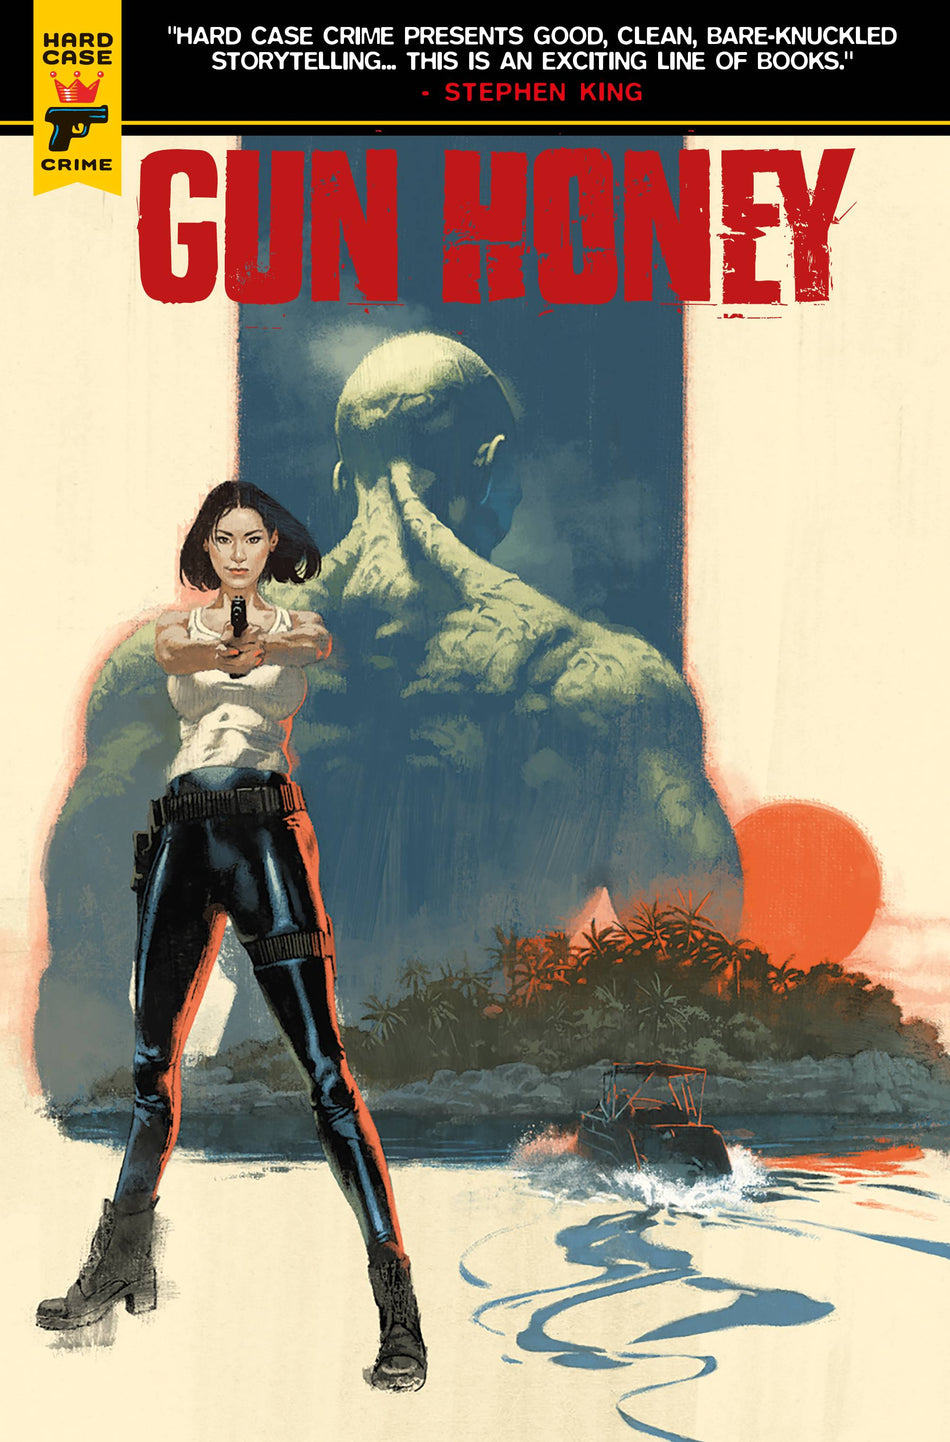 Photo of Gun Honey Issue 4 (of 4) CVR B Aspinall (MR) comic sold by Stronghold Collectibles